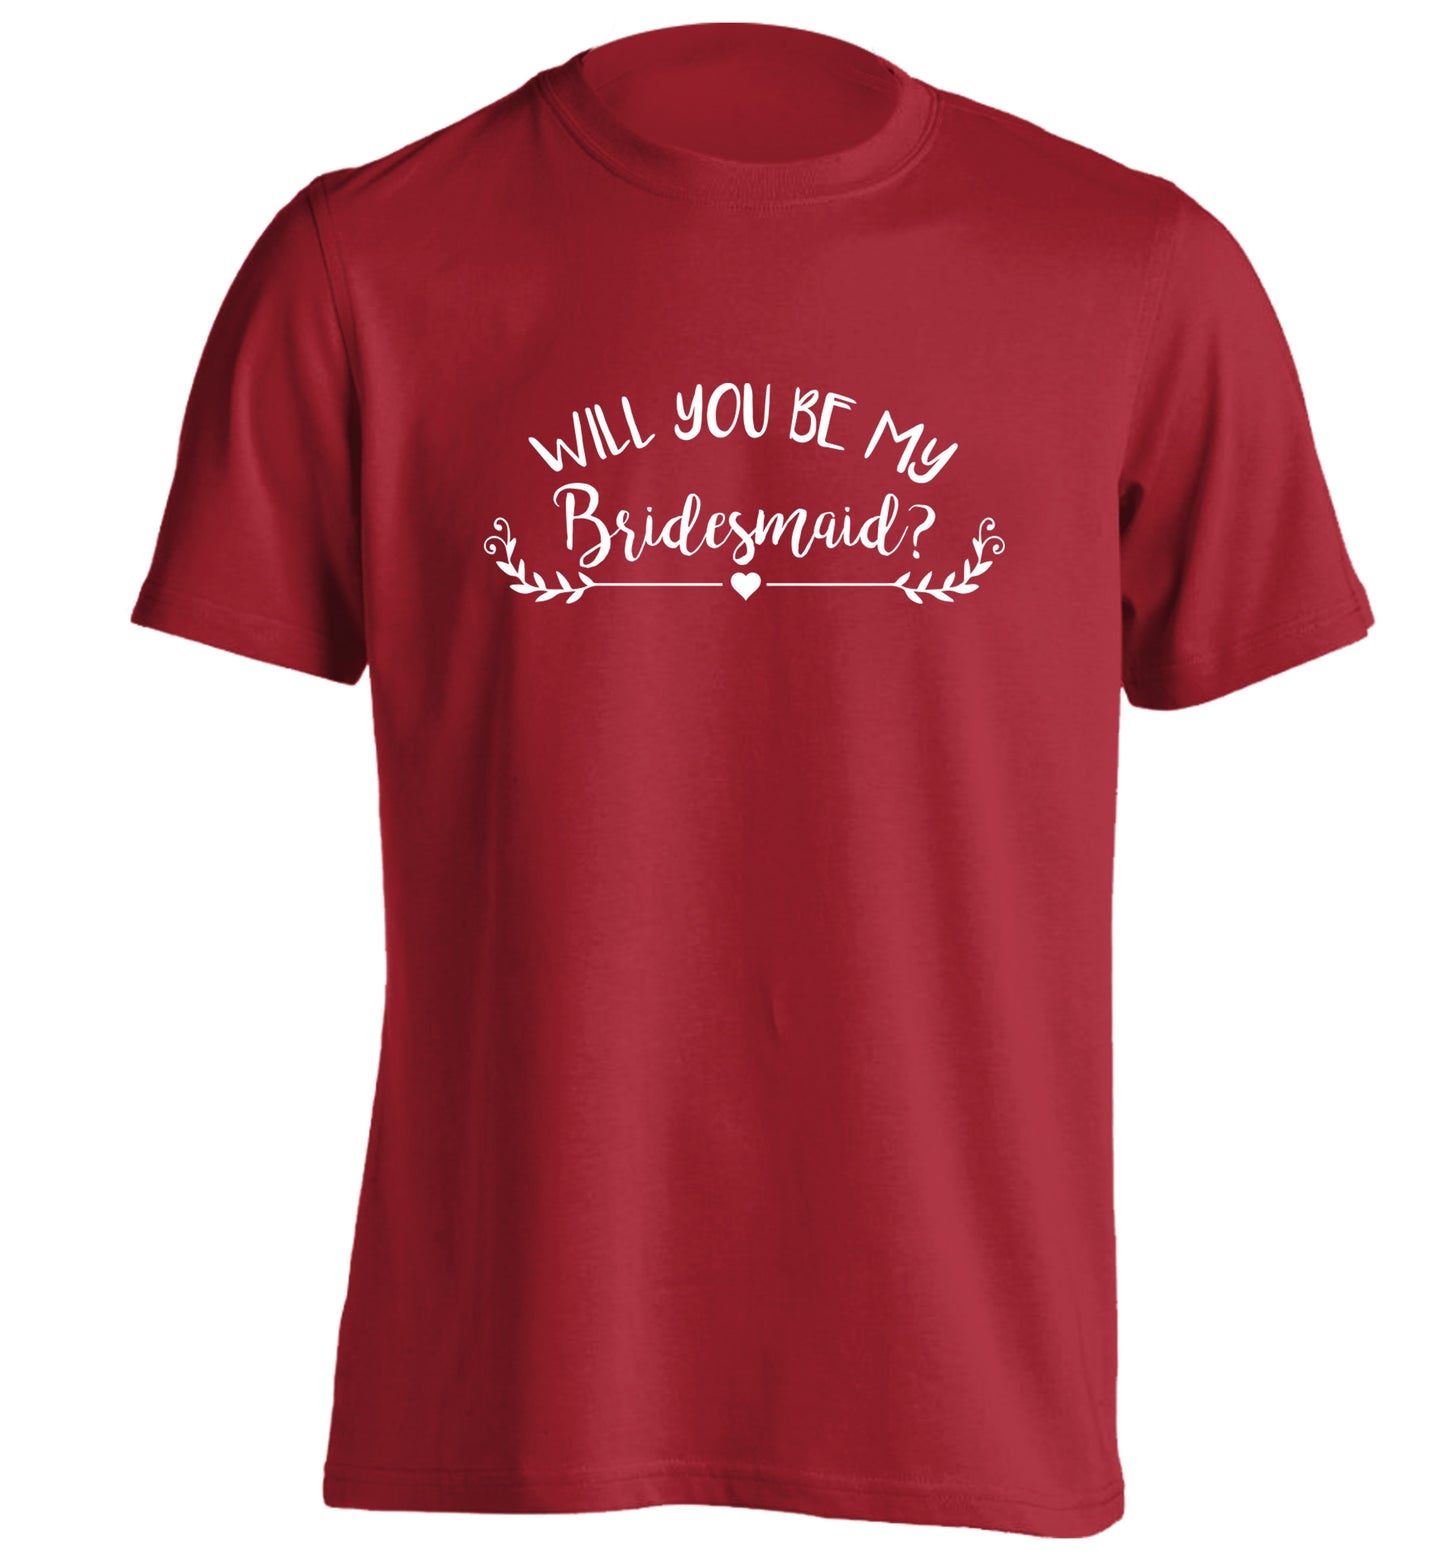 Will you be my bridesmaid? adults unisex red Tshirt 2XL